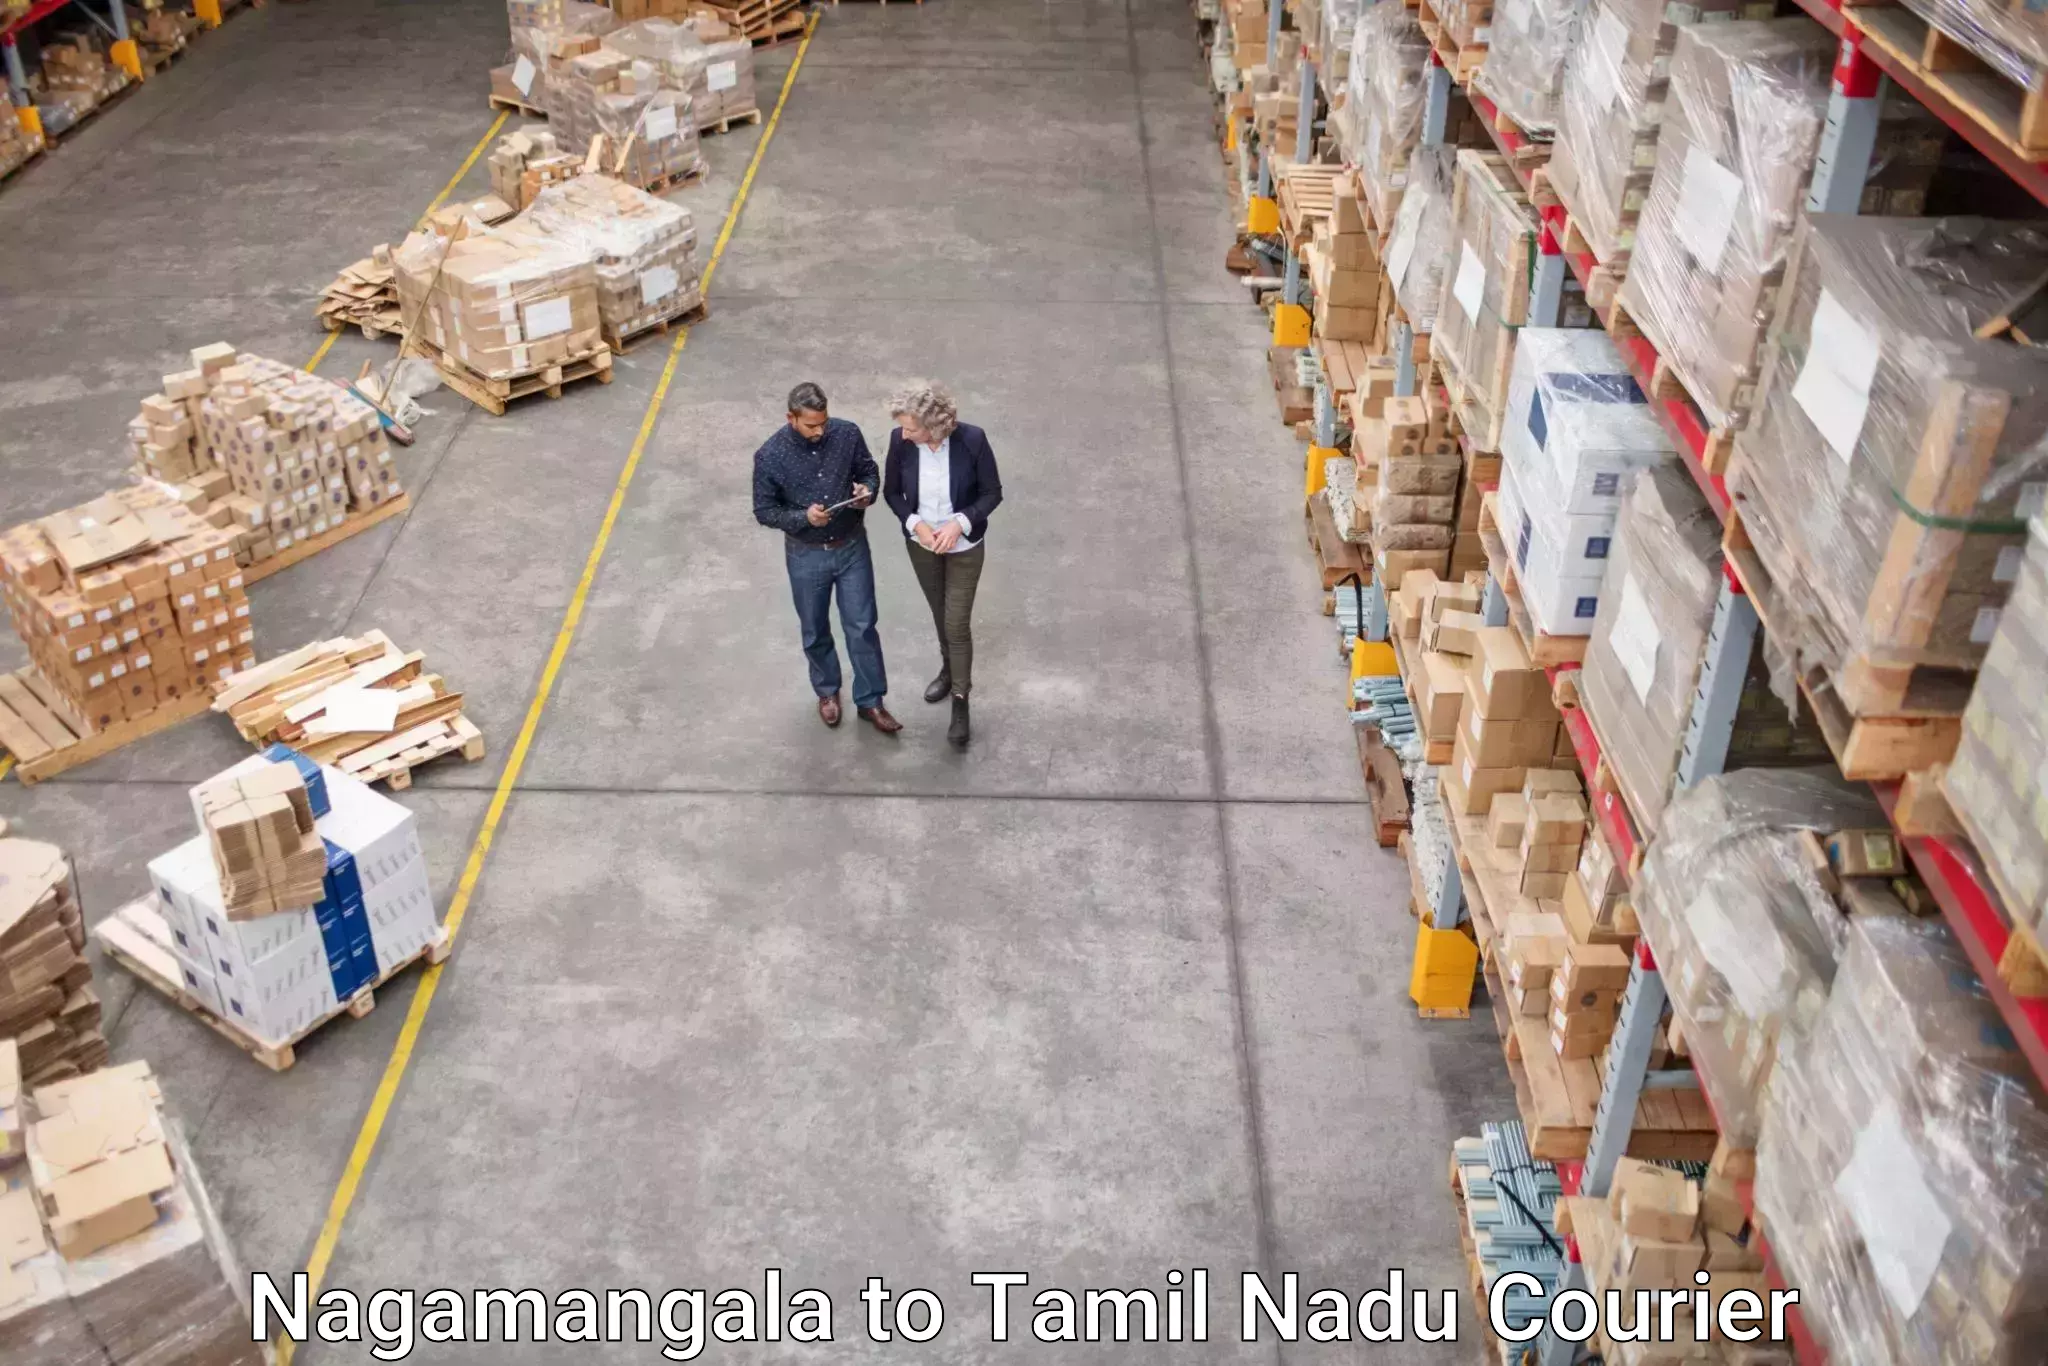 Courier service efficiency Nagamangala to Ennore Port Chennai